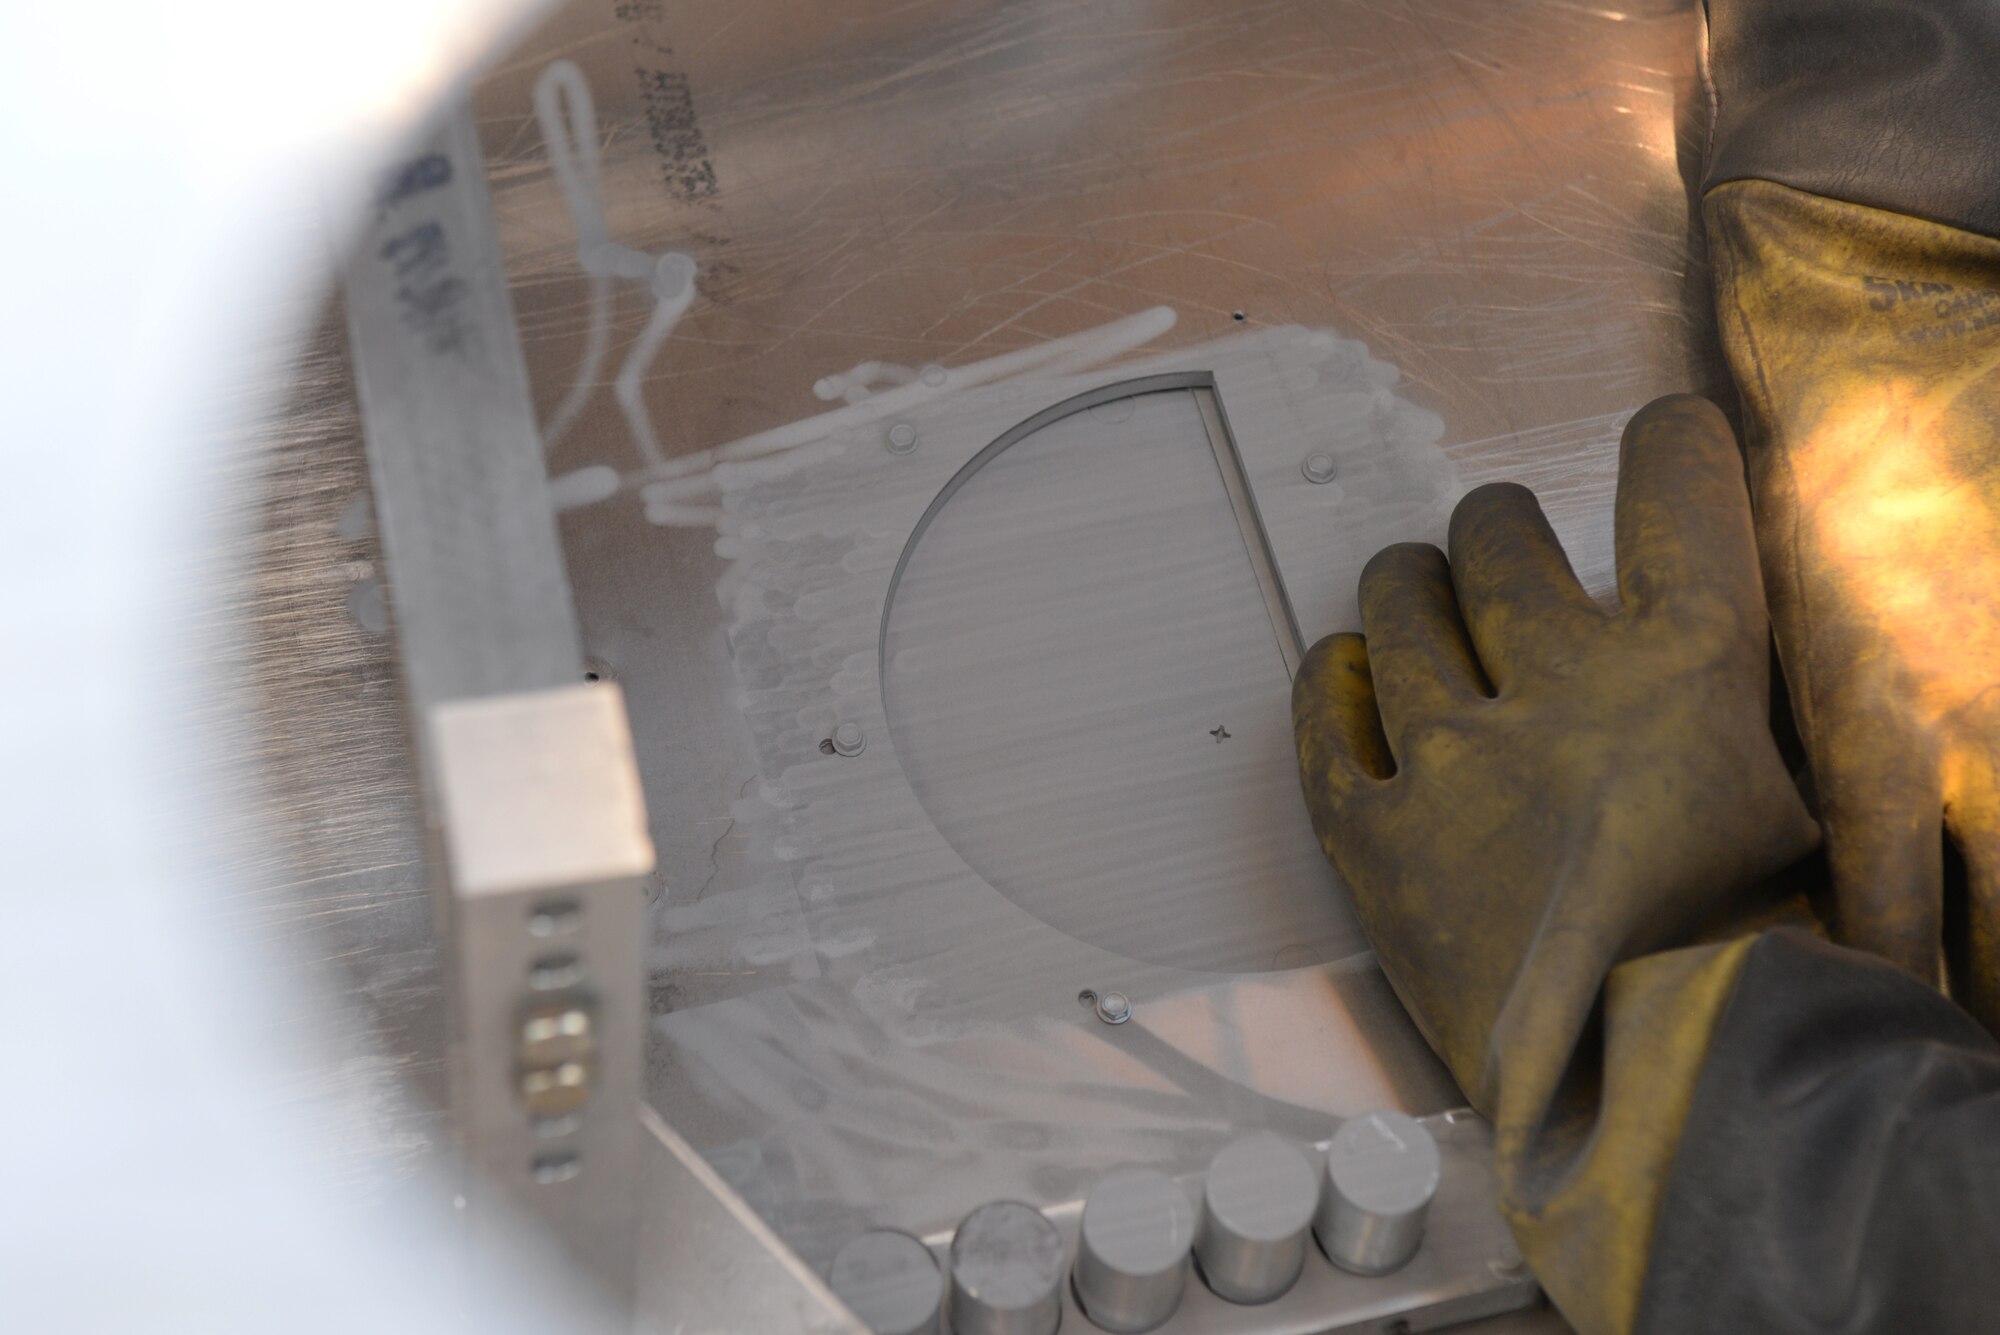 The 28th Maintenance Squadron Additive Manufacturing Rapid Repair Facility section conducted its first-ever Cold Spray repair on a B-52 Stratofortress static display at the South Dakota Air and Space Museum in Box Elder, S.D., Sept. 18, 2019. The Repair of the B-52 is meant to show the capabilities and possible future uses that Cold Spray can have for the Air Force.  (U.S. Air Force photo by Airman Quentin K. Marx)